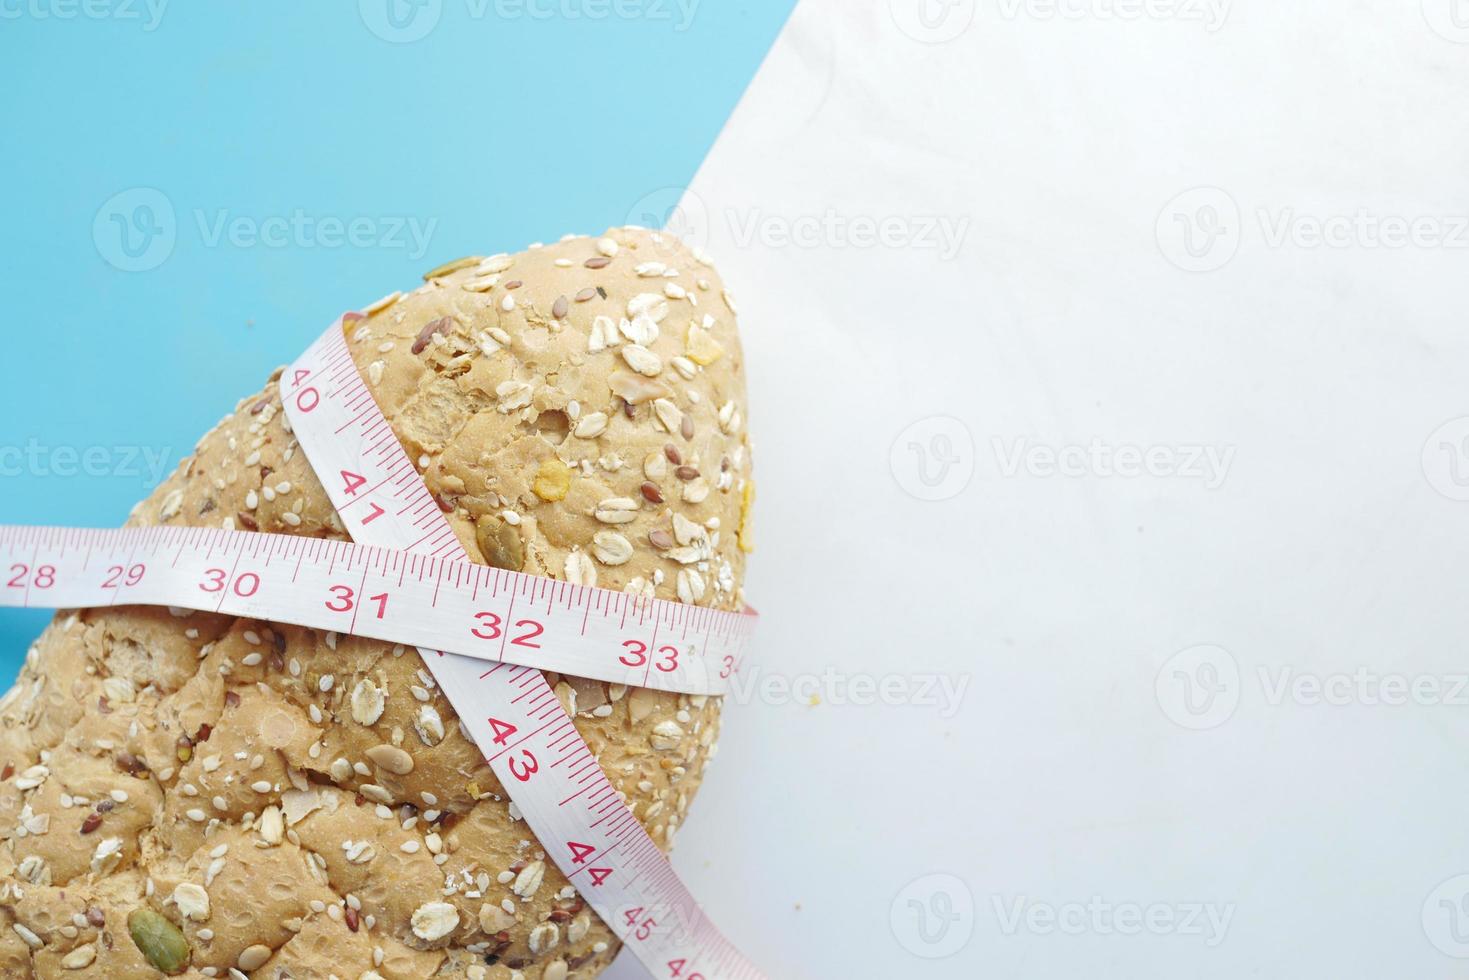 Slice of whole meal bread and measurement tape on table photo